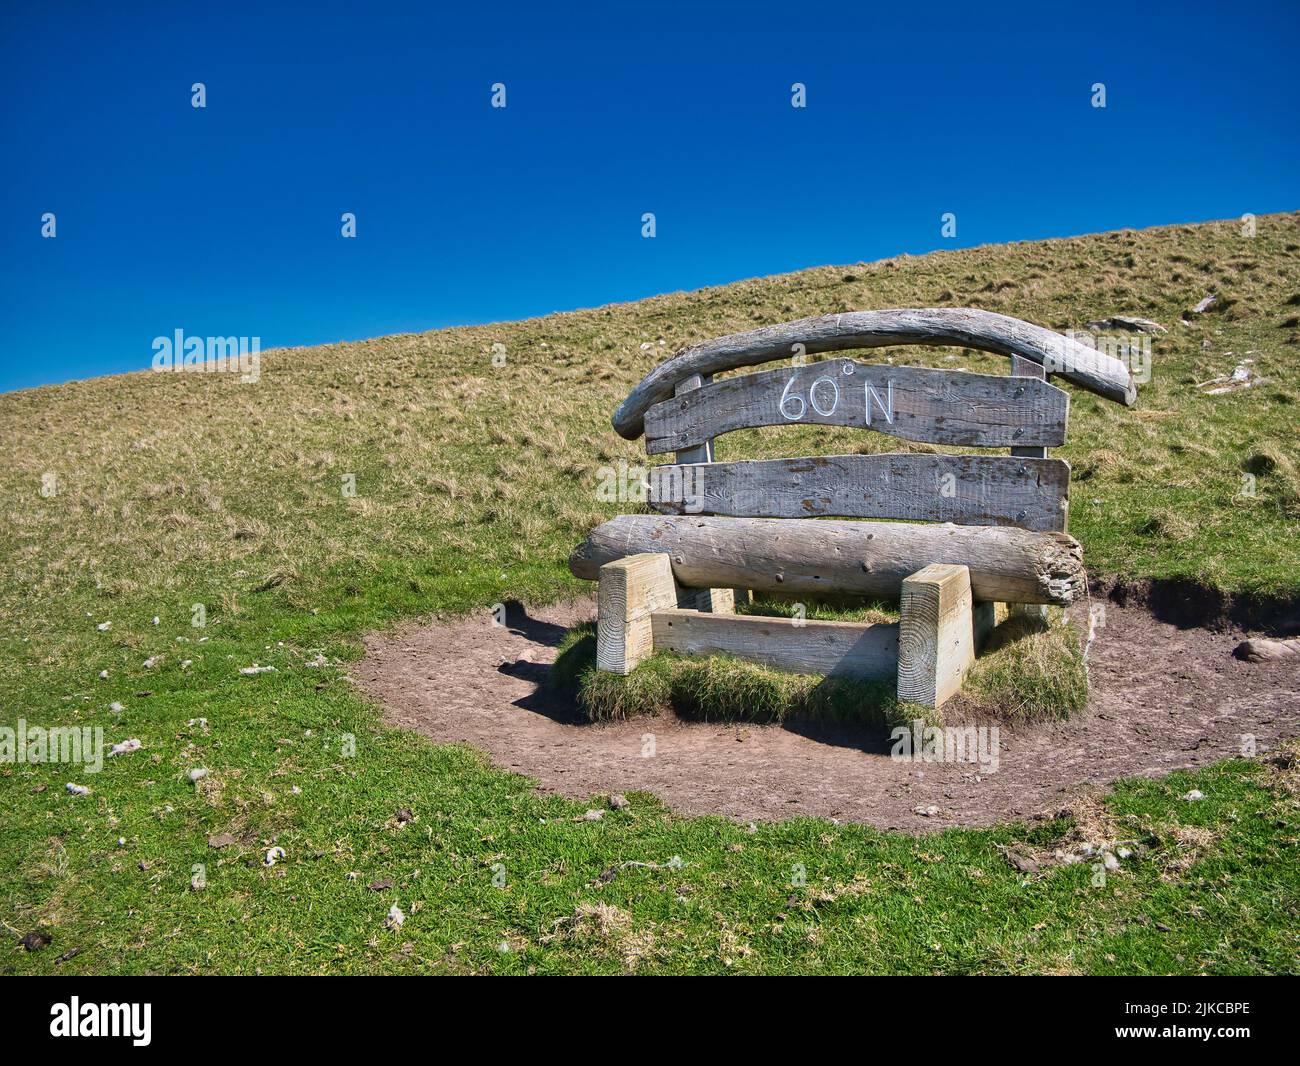 A wooden bench on the Island of Mousa, Shetland, UK marks the position of the 60 degree north parallel, which passes through the Islands. Stock Photo